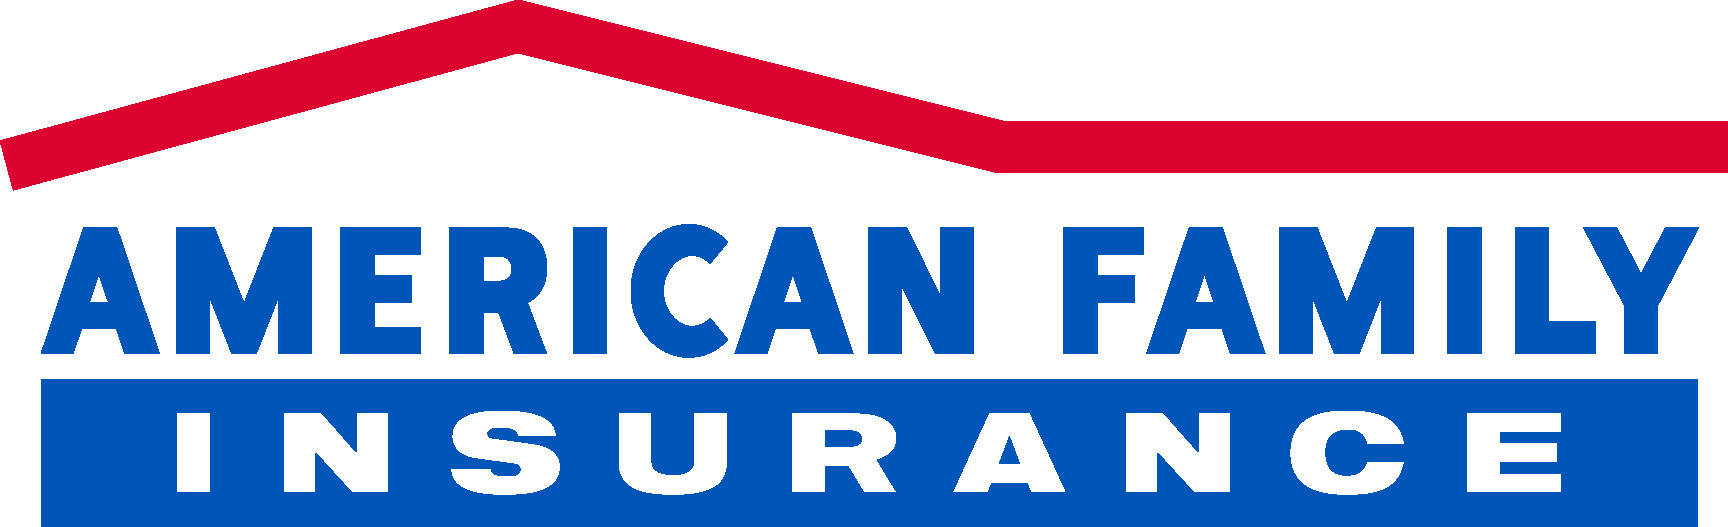 American Family Insurance Quote
 DreamKeep Rewards